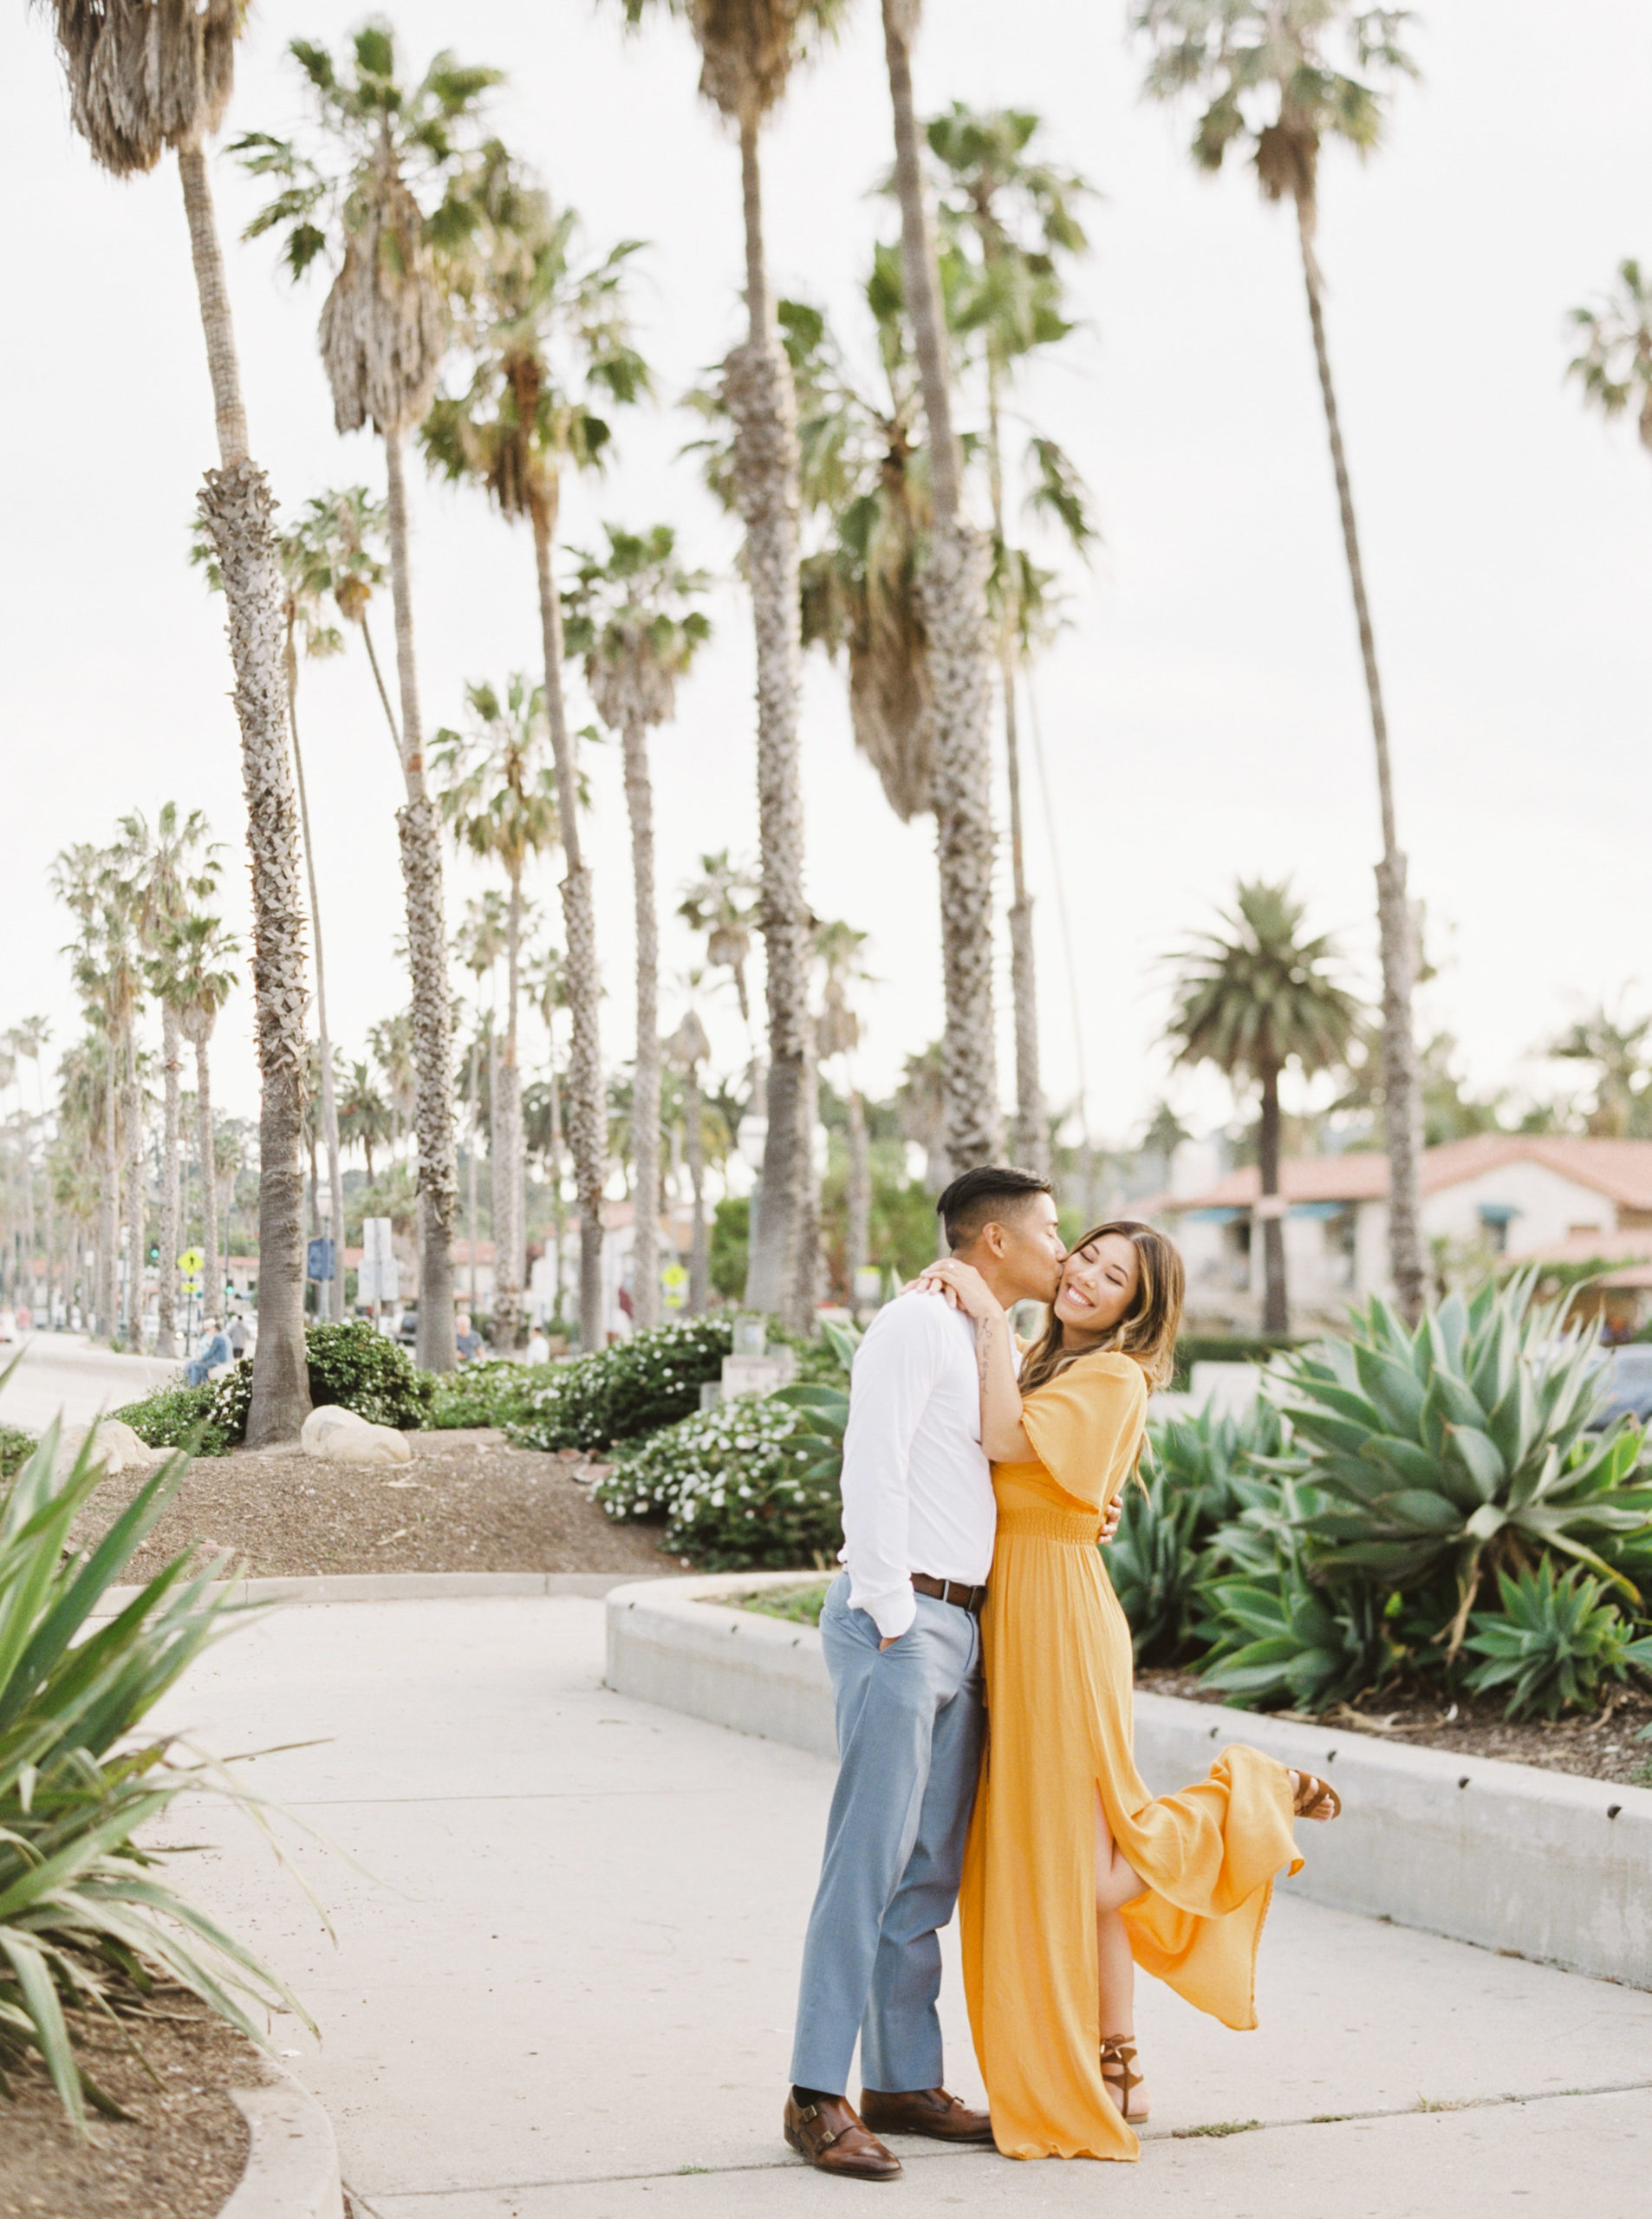 Couple in love, kissing in the streets of Santa Barbara for their honeymoon photos